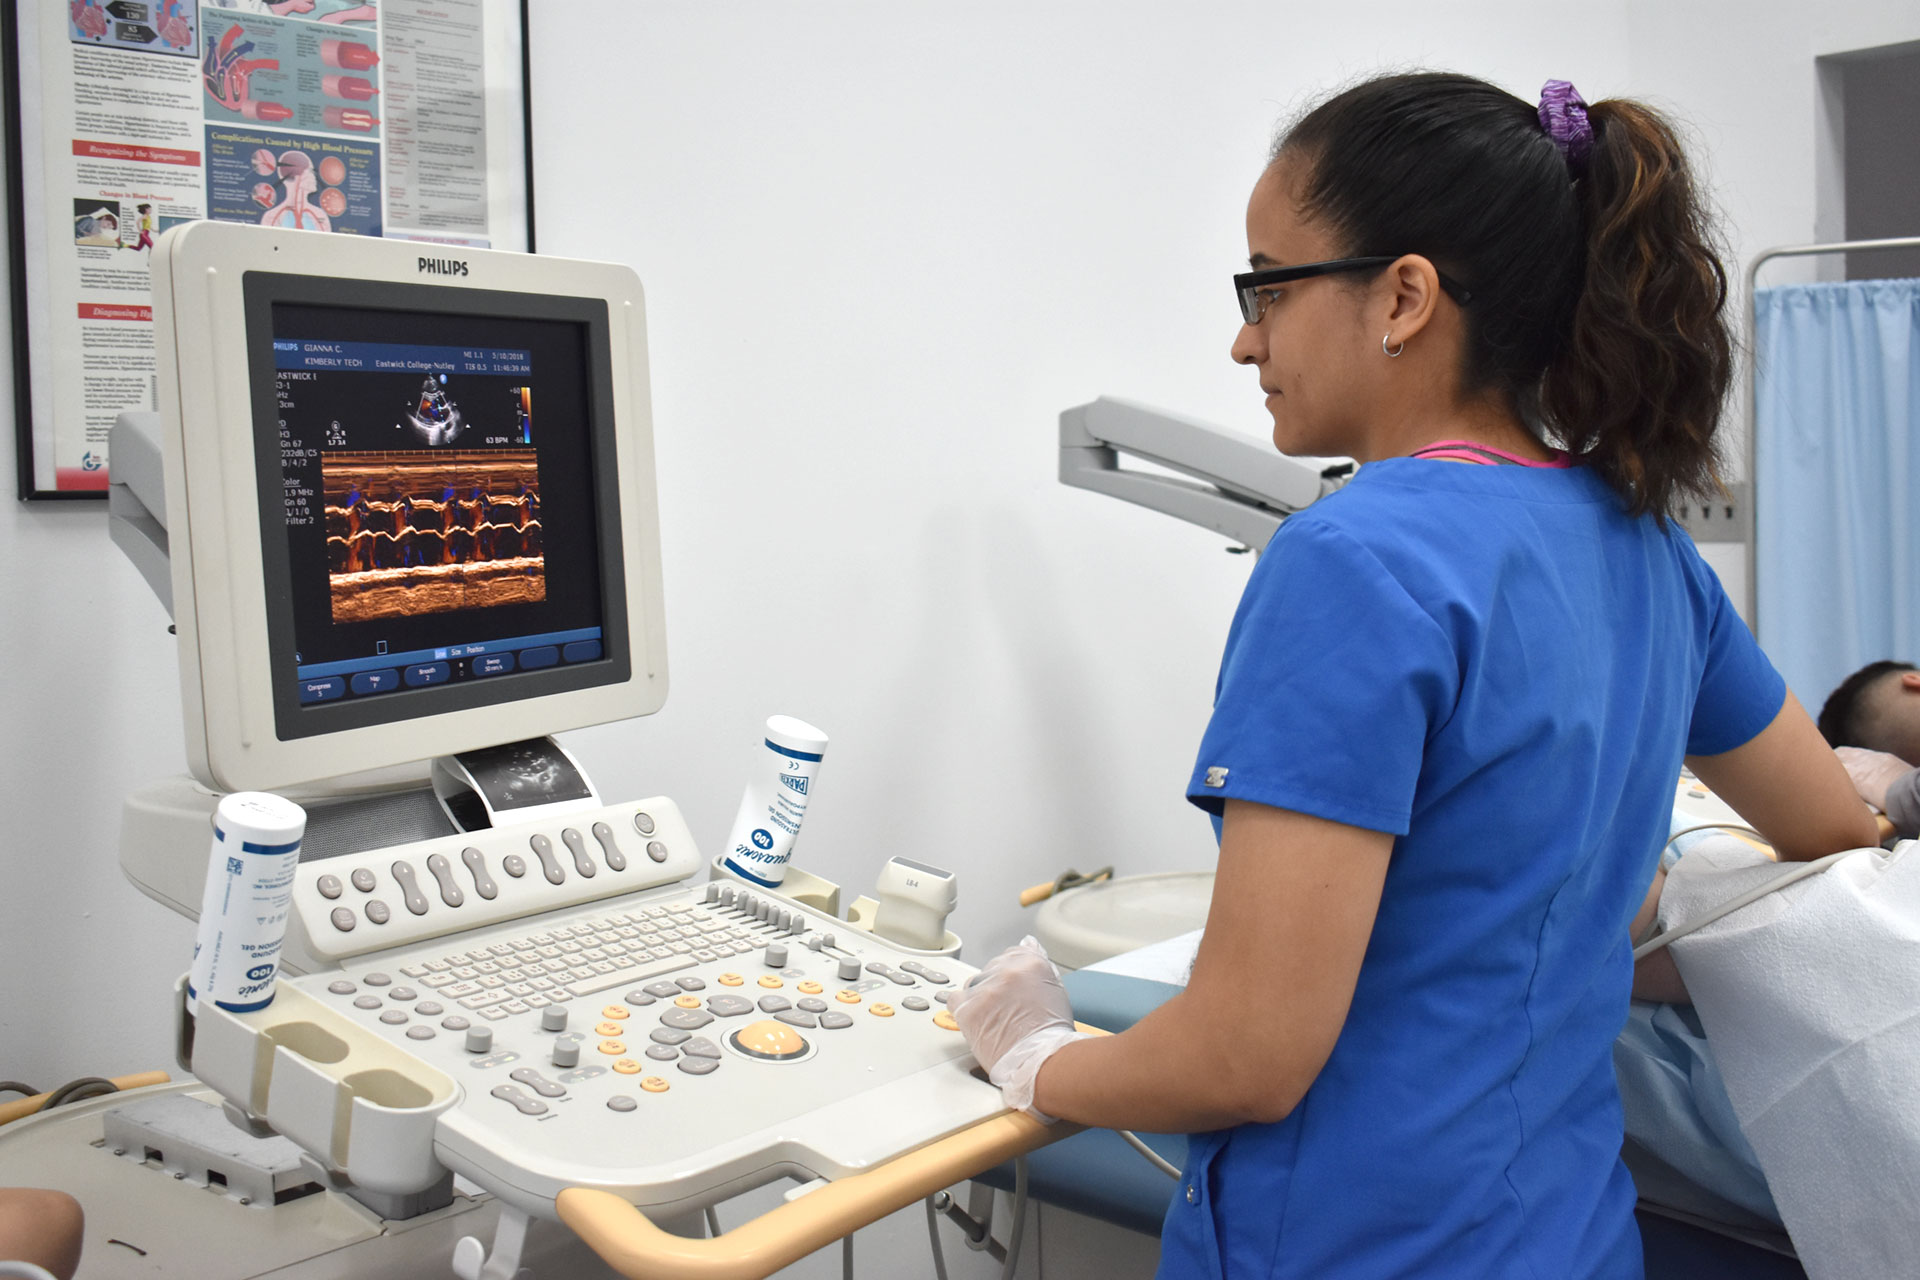 Sonography student practices observing ultrasound machine on fellow student